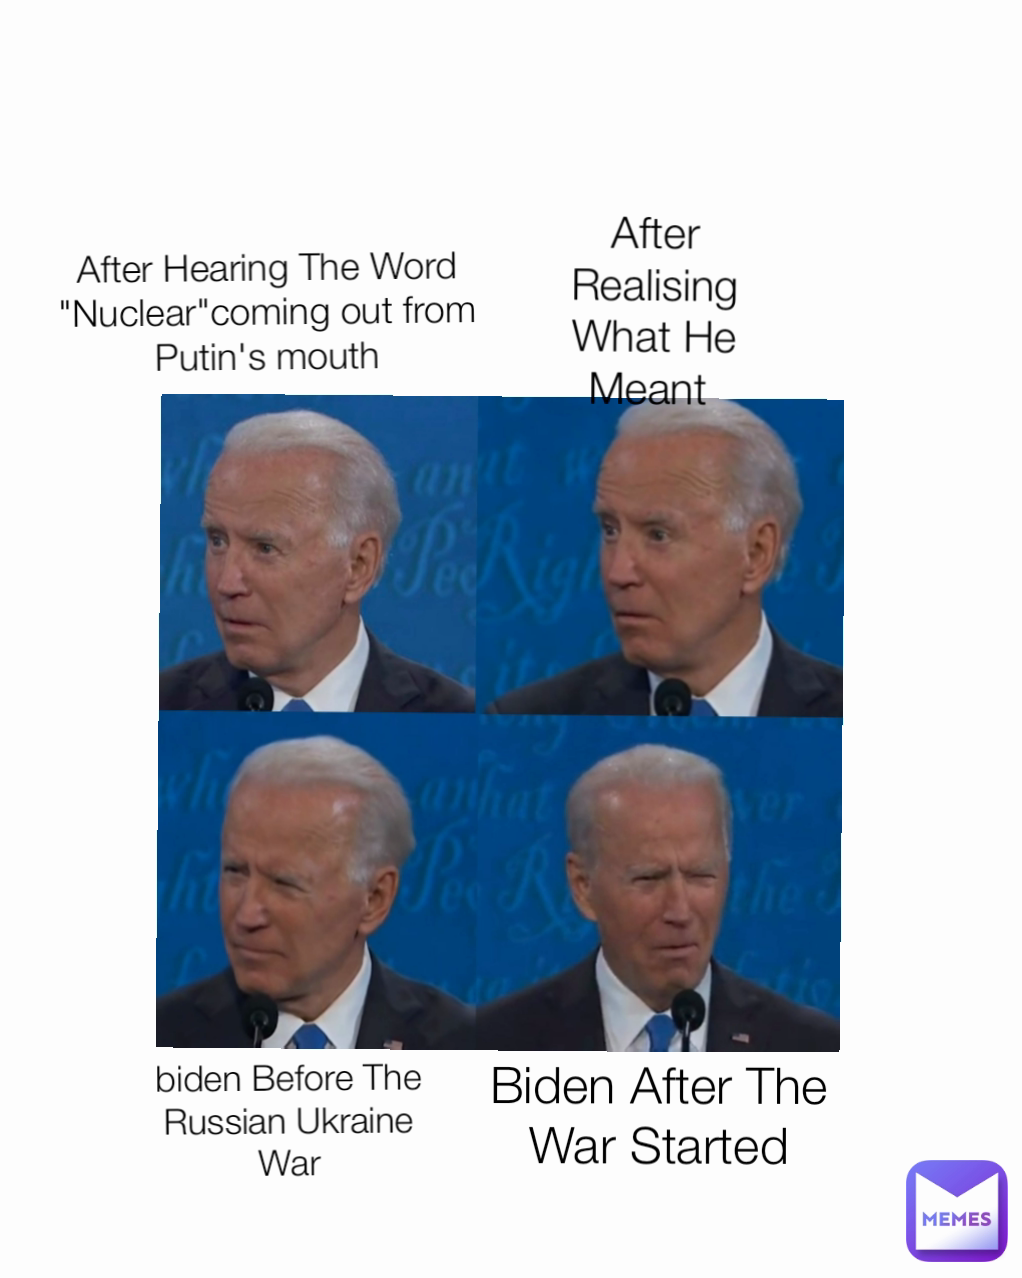 biden Before The Russian Ukraine War Type Text After Hearing The Word "Nuclear"coming out from Putin's mouth After Realising What He Meant  Biden After The War Started